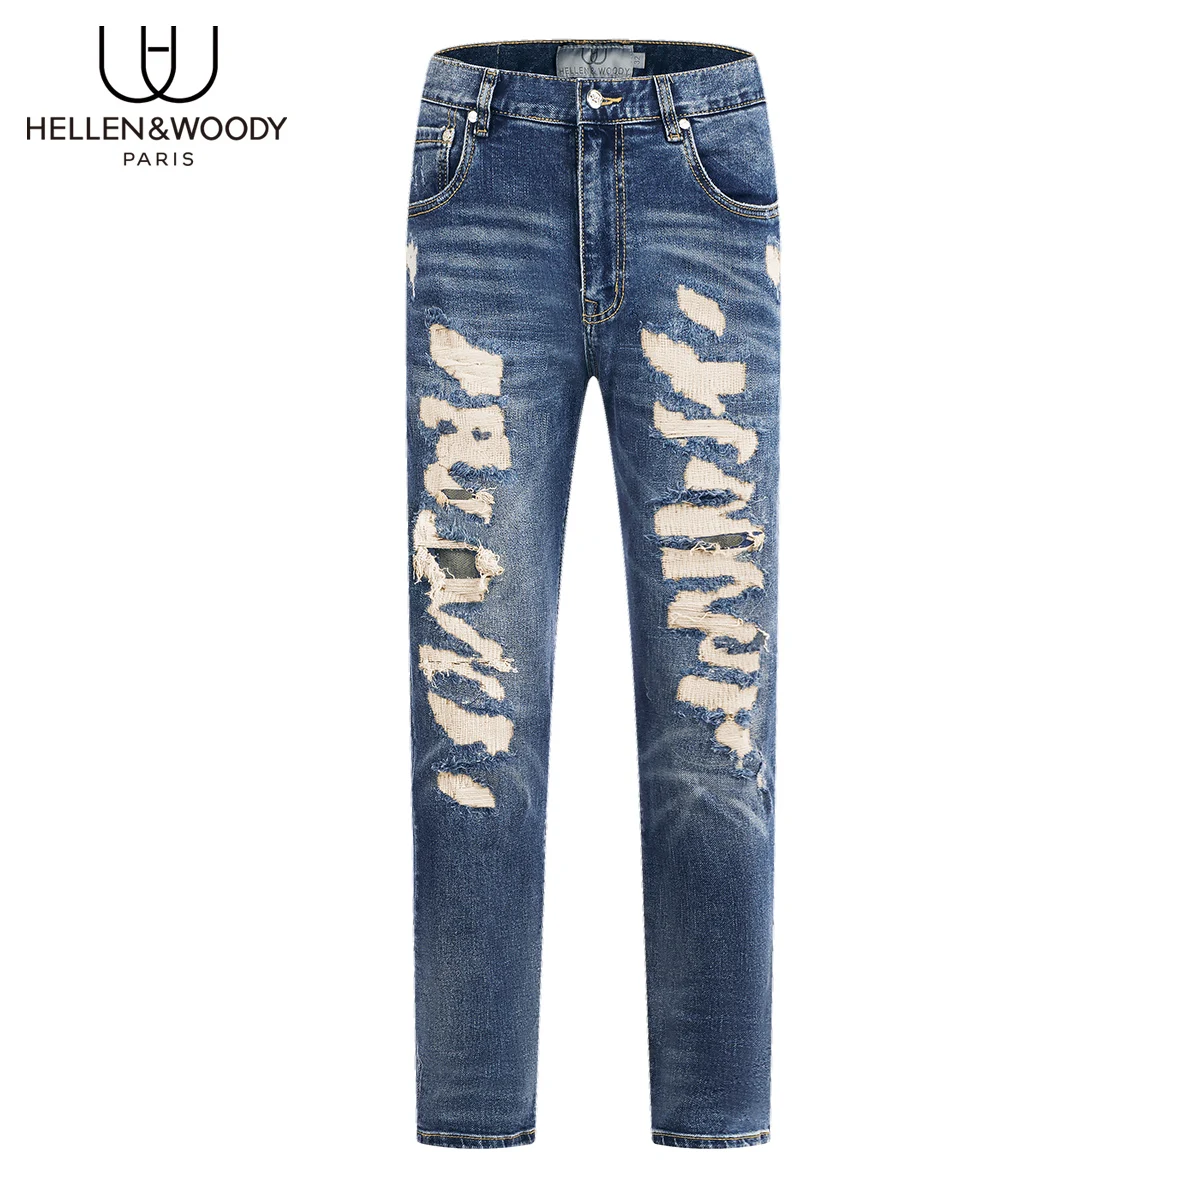 HELLEN&WOODY Men Fashion Pleated Jeans Slim Fit Straight Full Length Pants High Quality Denim Washed